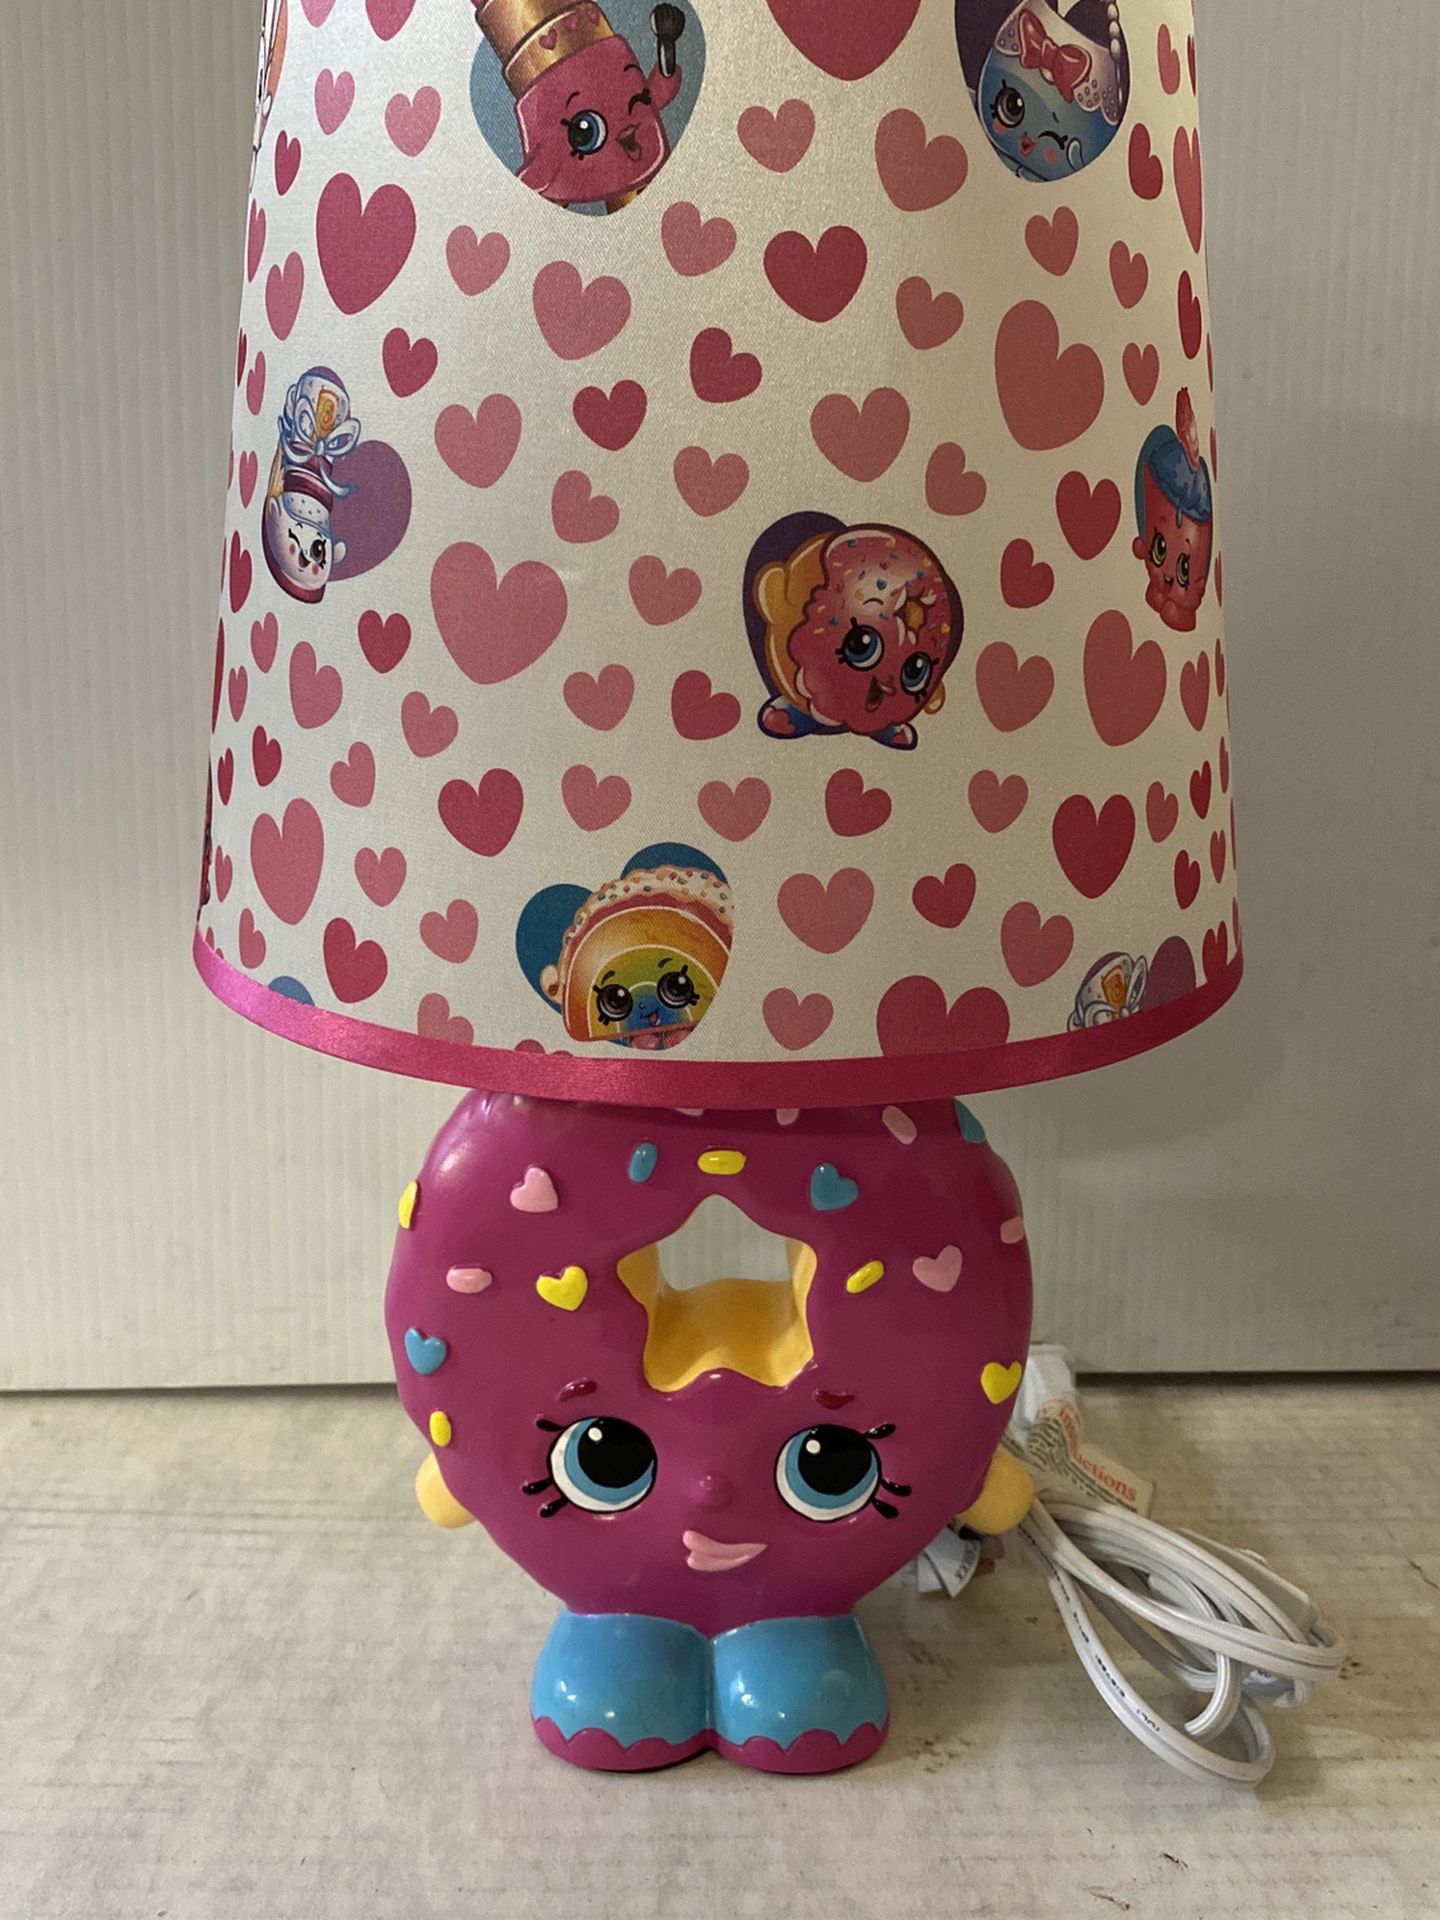 SHOPKINS D’Lish DONUT LAMP Pink W/ Sprinkles And A Smile